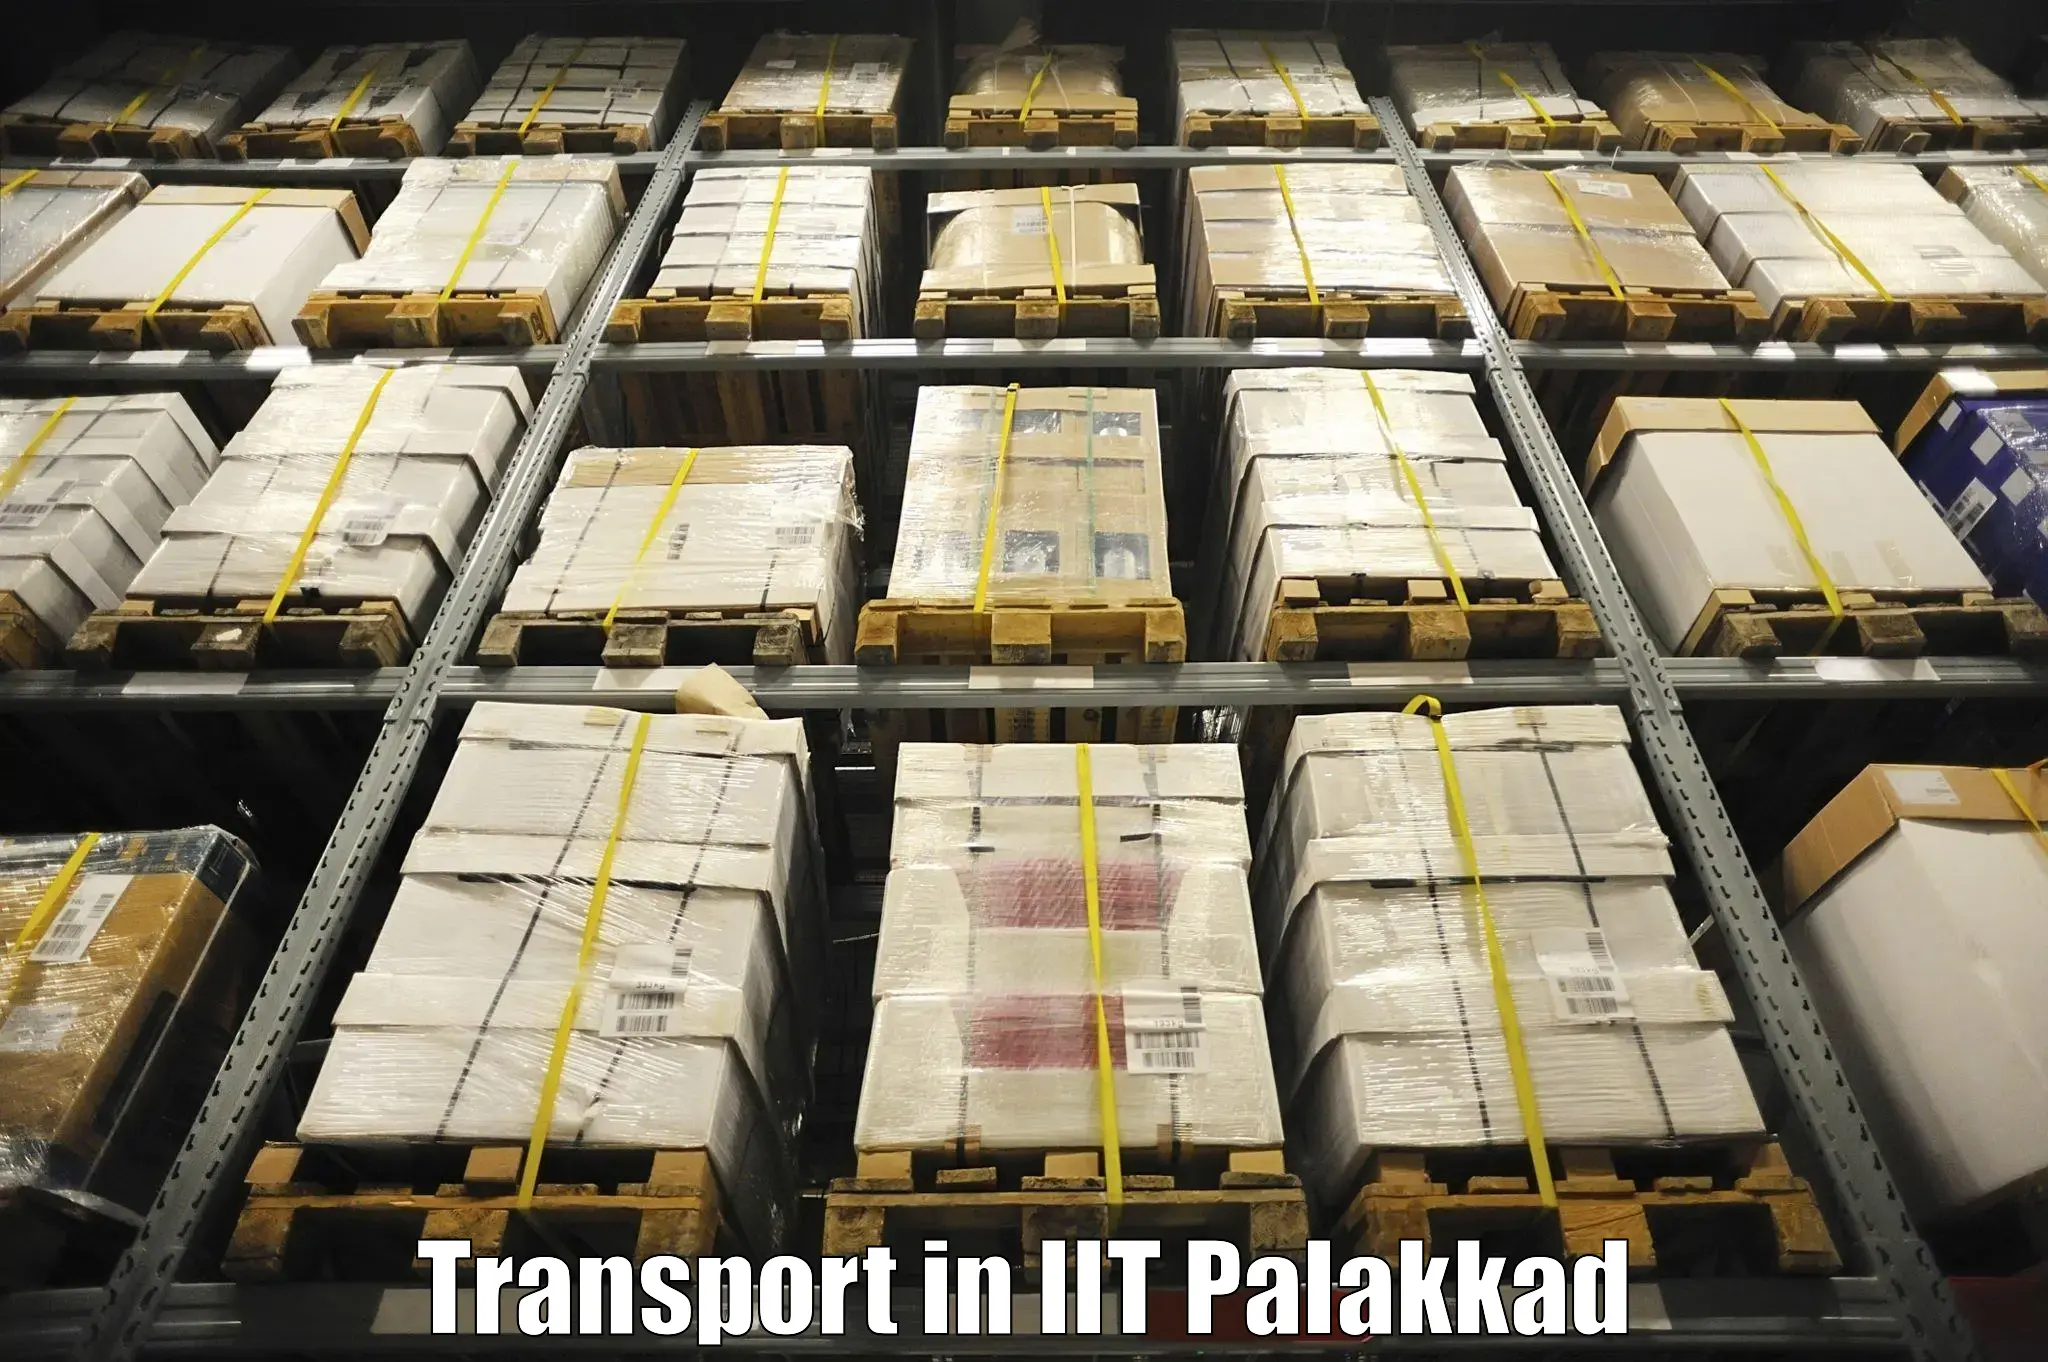 Air freight transport services in IIT Palakkad